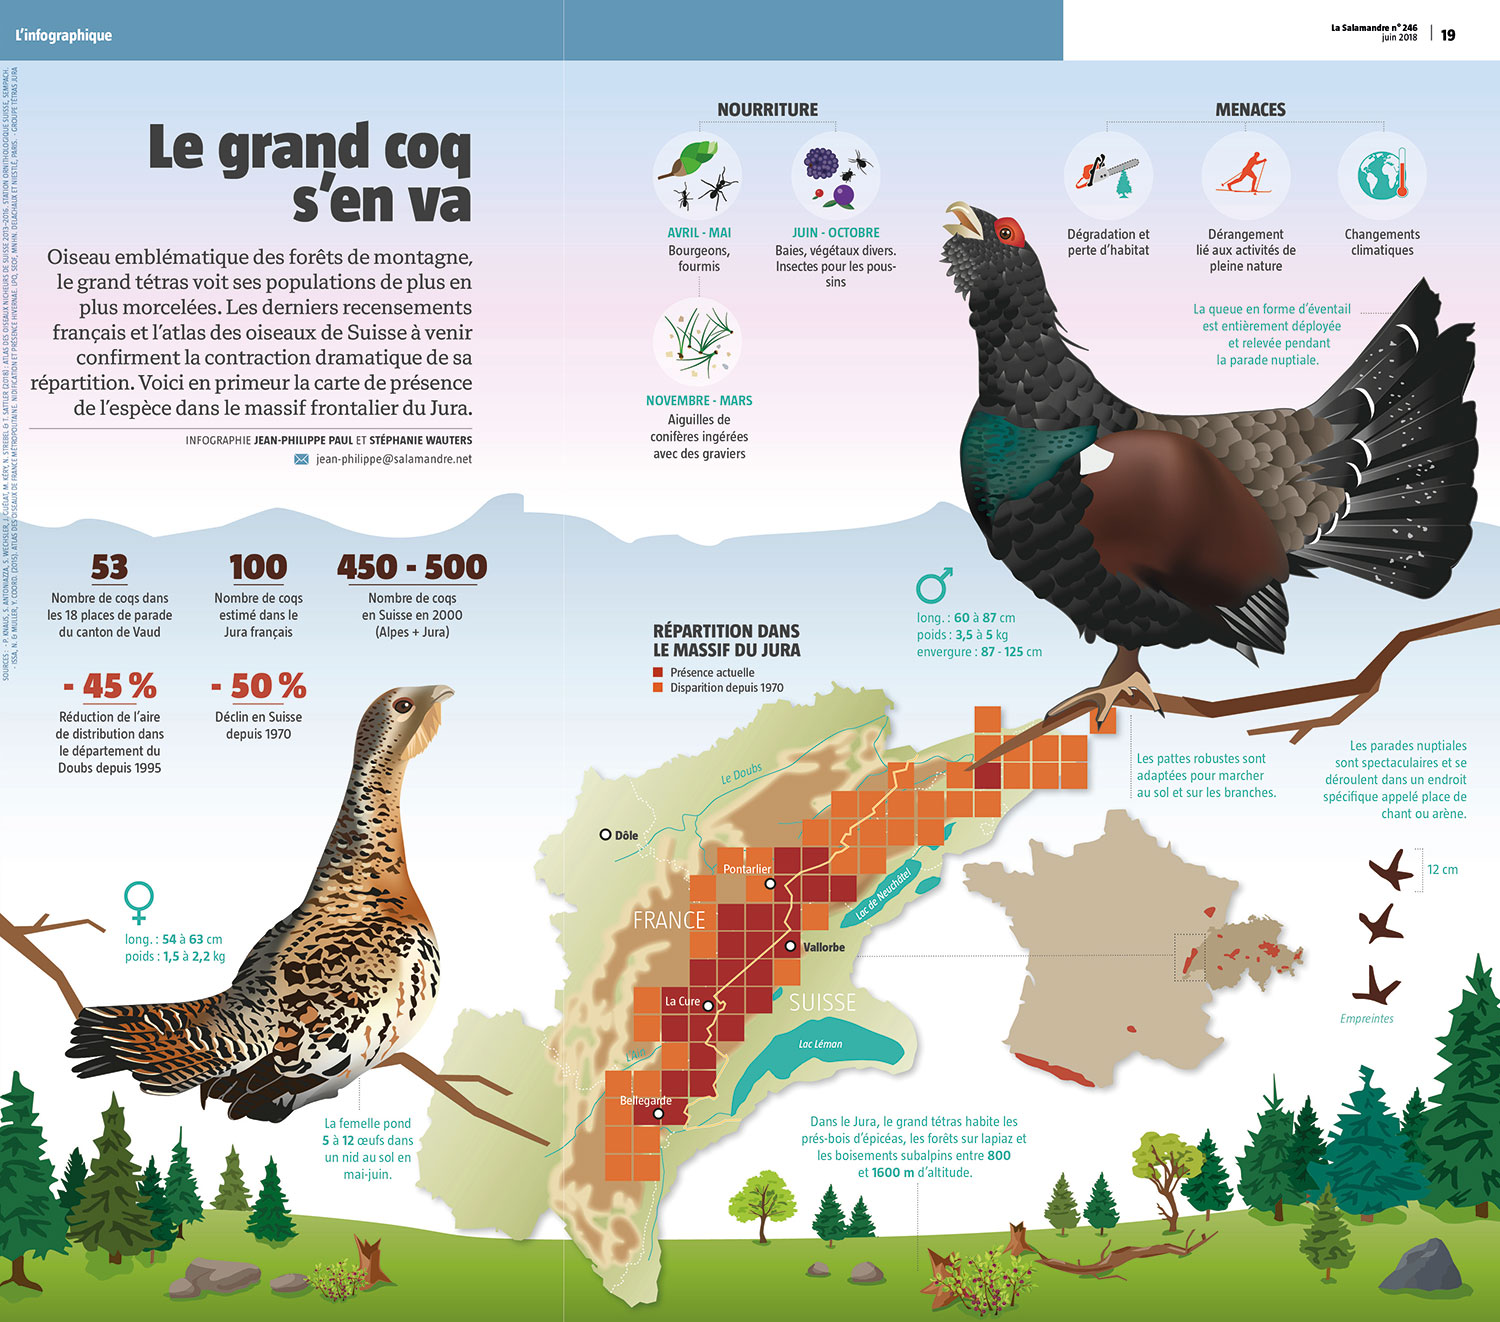 capercaillie_infographic_2018.jpg